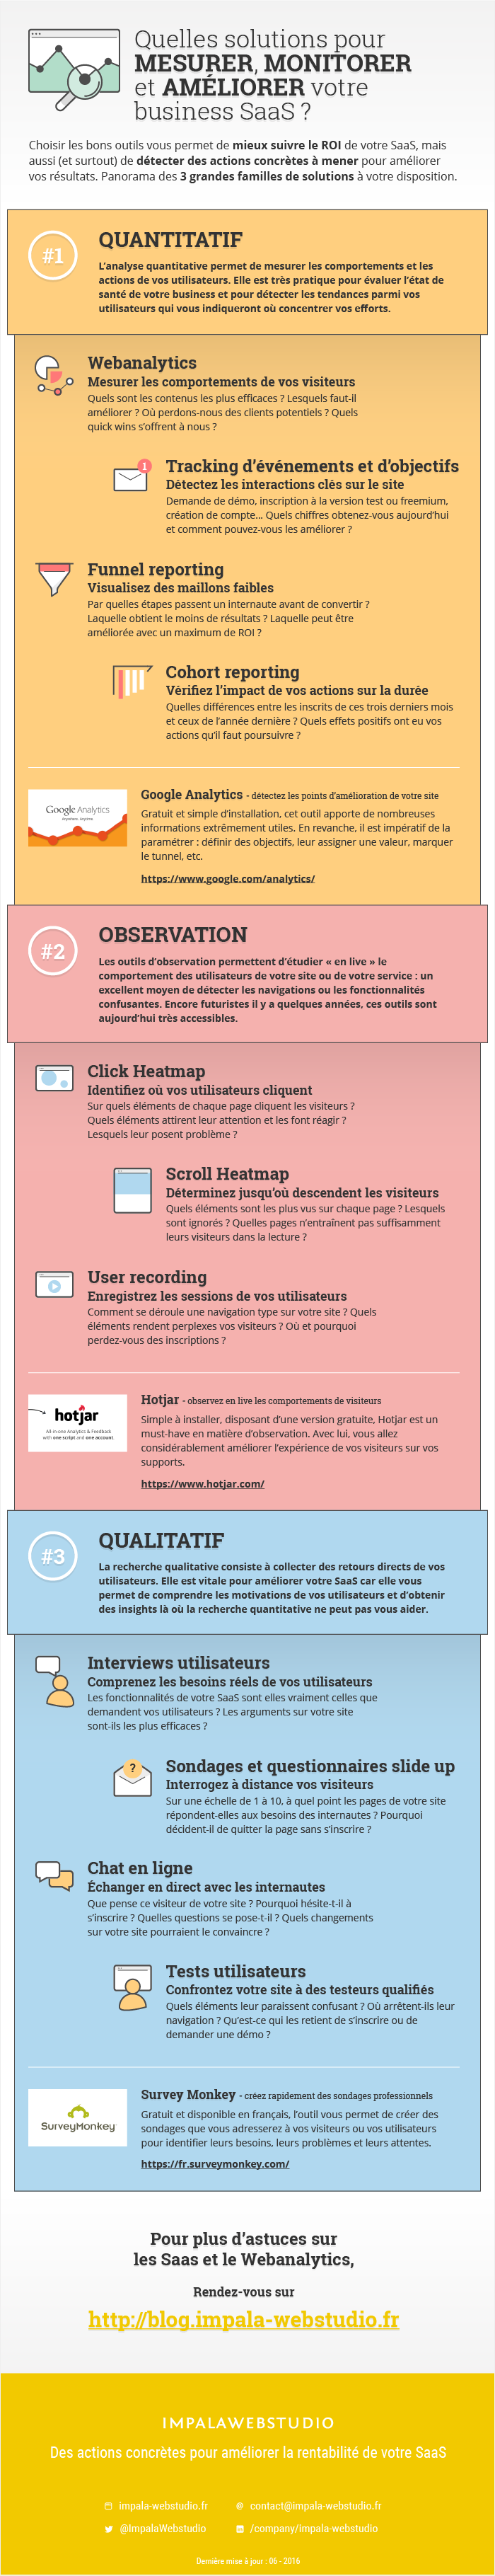 IWS_infographie-monitorer_01.png